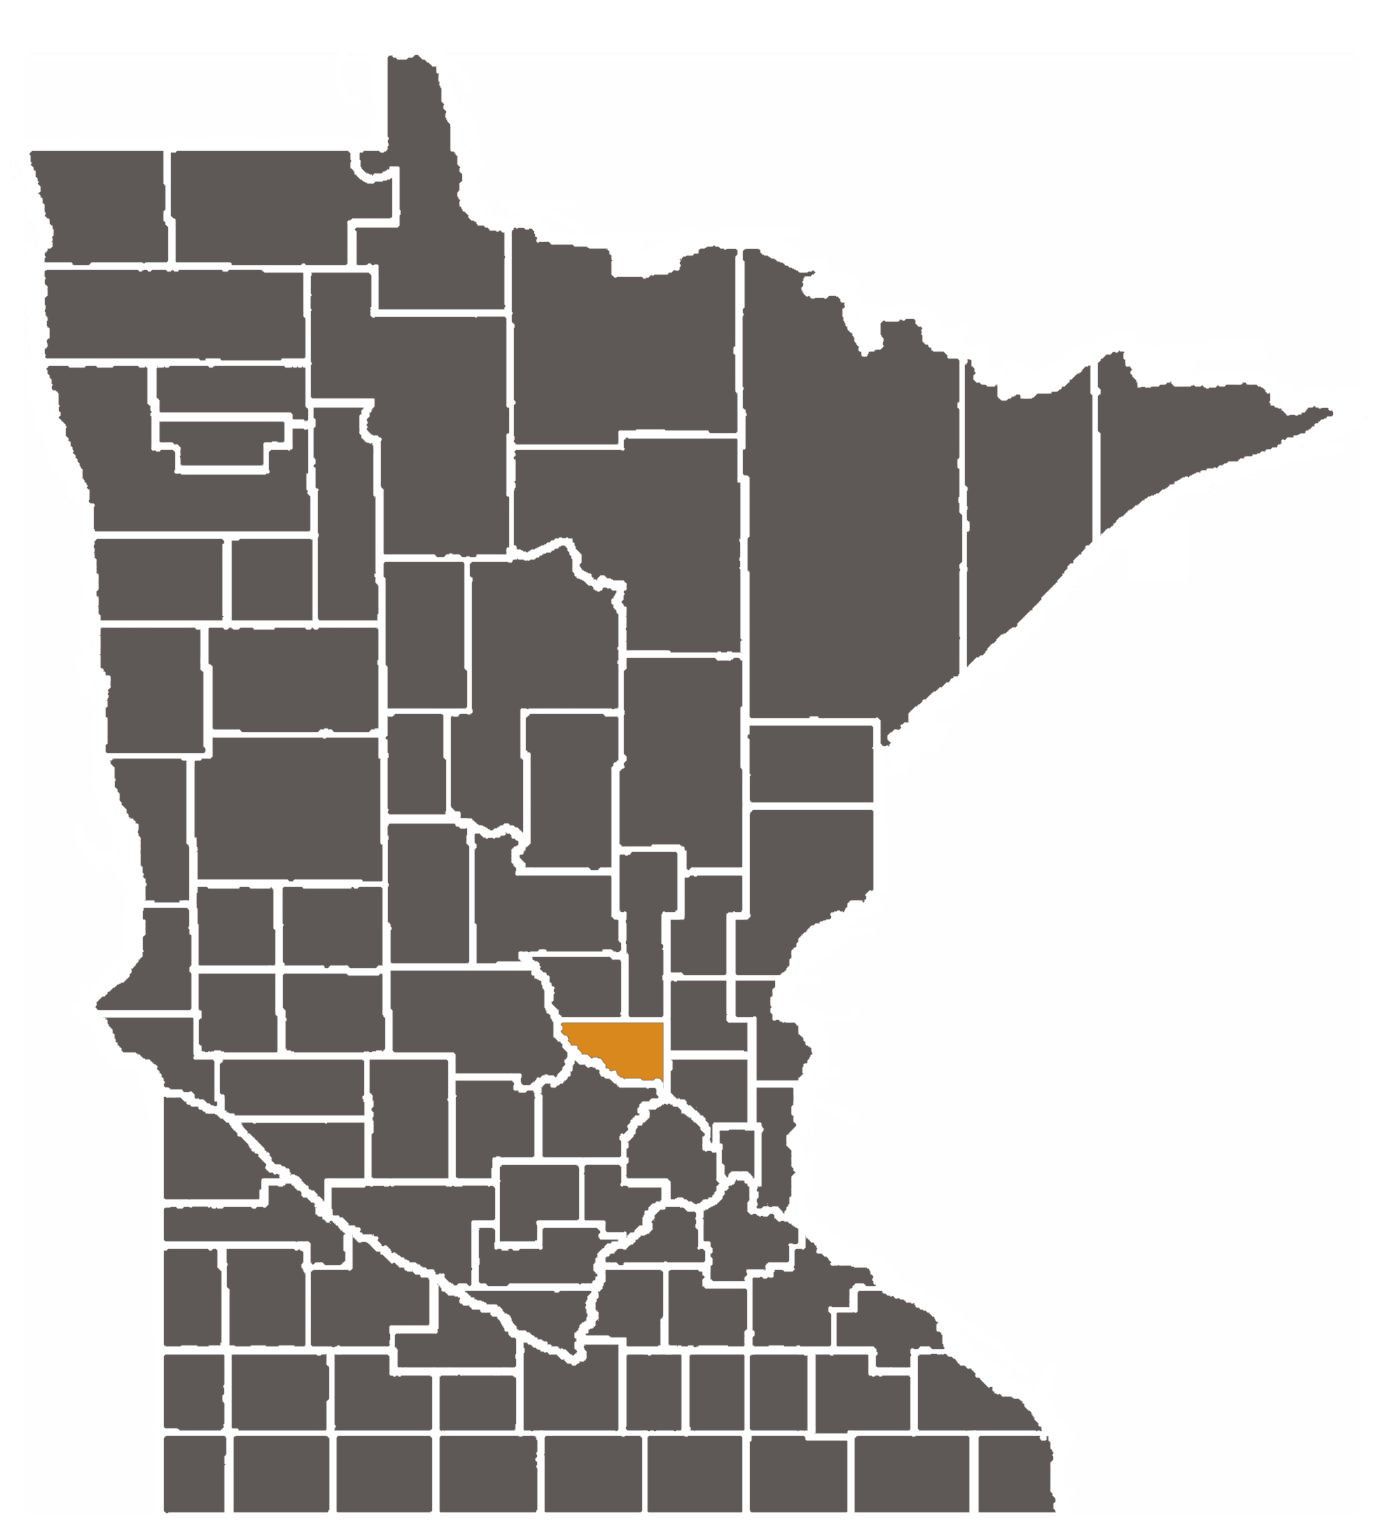 Minnesota map with Shurburne County highlighted.